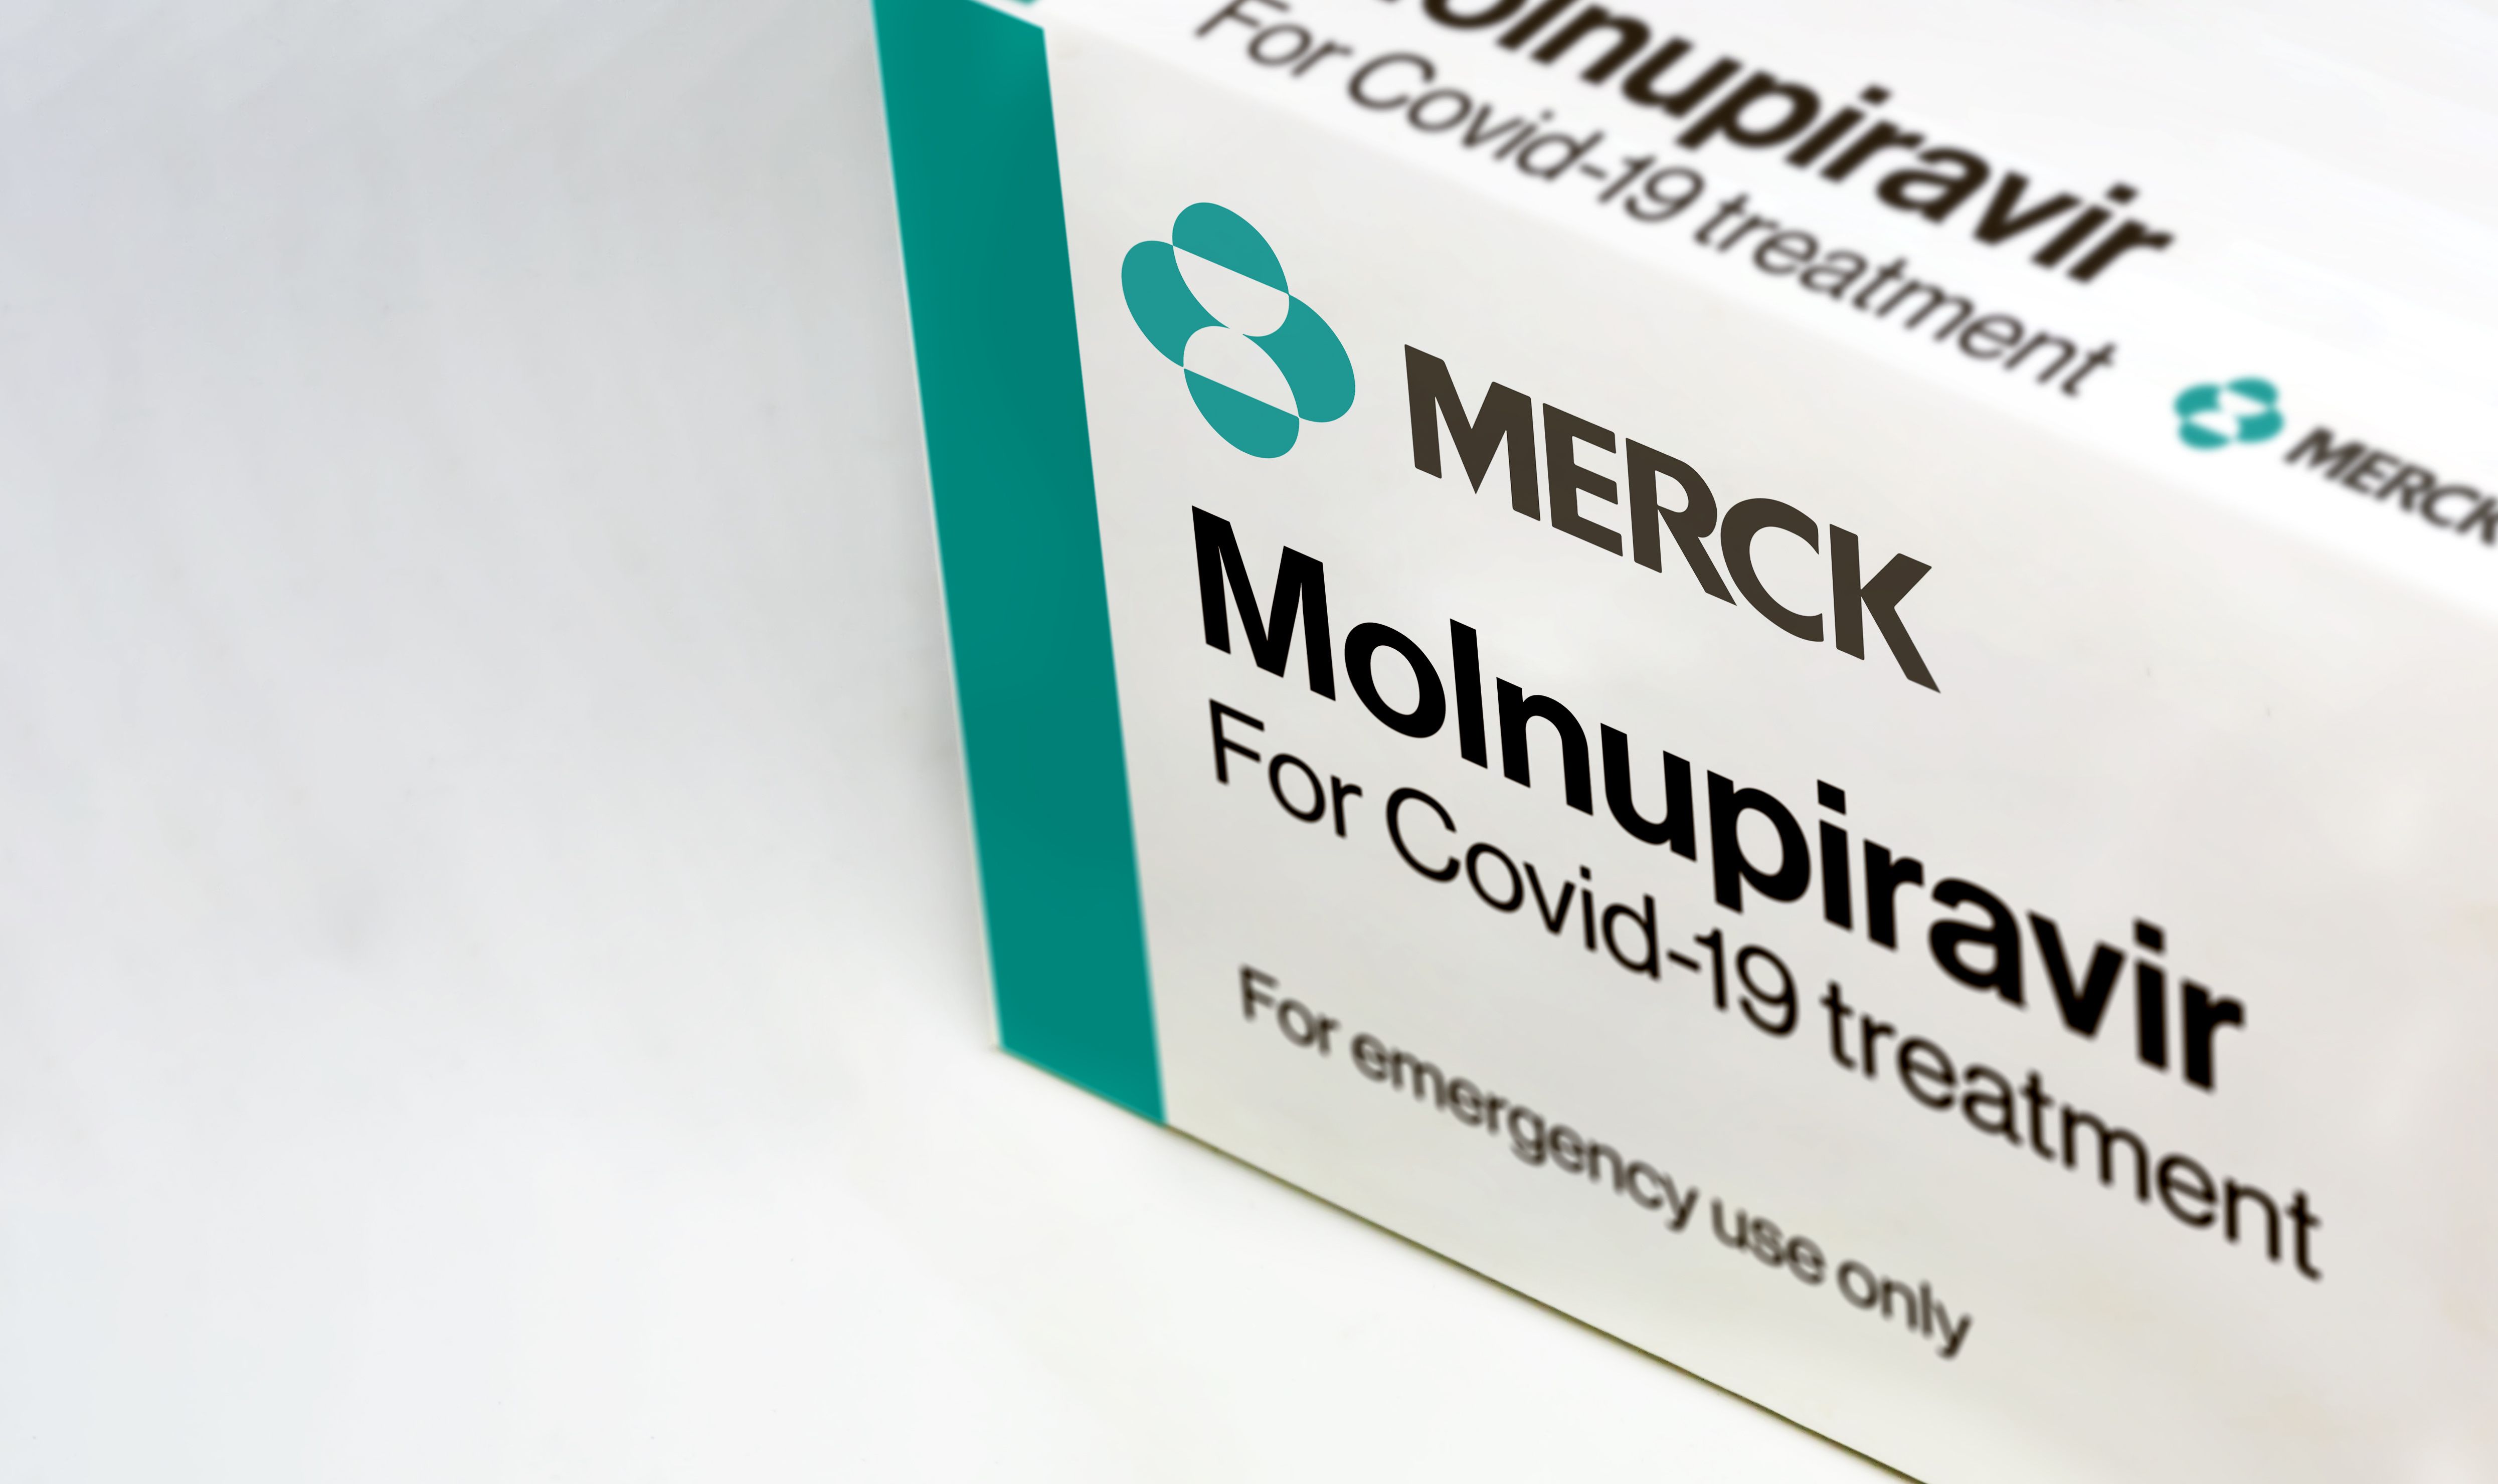 Despite failing to meet primary trial endpoints, molnupiravir reduced the length of COVID-19 infection by 4.2 days in vaccinated patients.